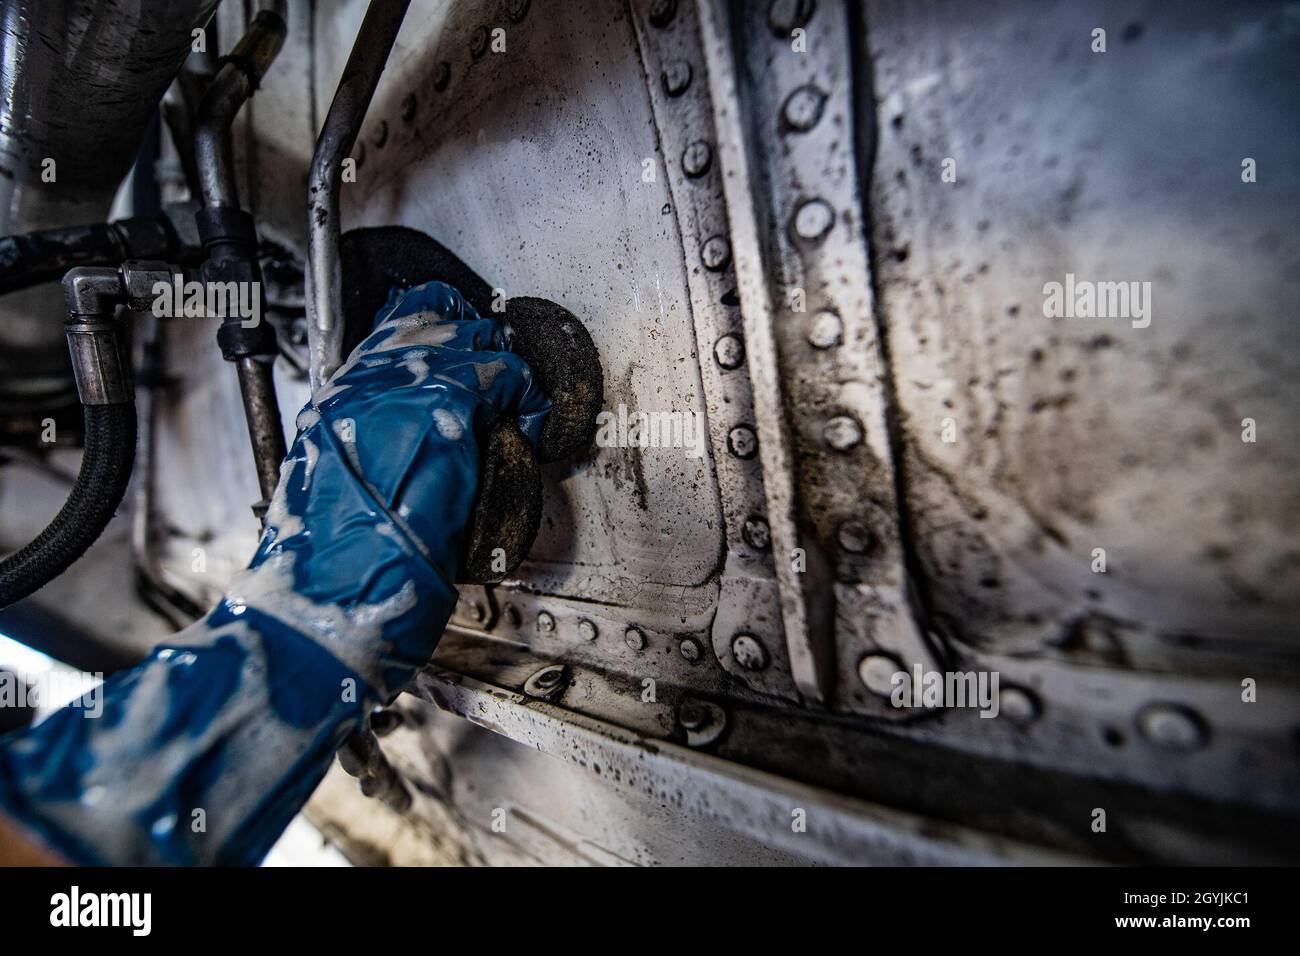 Guy Du, a contractor who works for Starlight Corporation cleans panels located near the landing gear a C-17 Globemaster III during an aircraft wash at March Air Reserve Base, California, Jan. 7, 2020. Aircraft are washed routinely to prevent corrosion and help promote aerodynamics. (U.S. Air Force photo by Joshua J. Seybert) Stock Photo